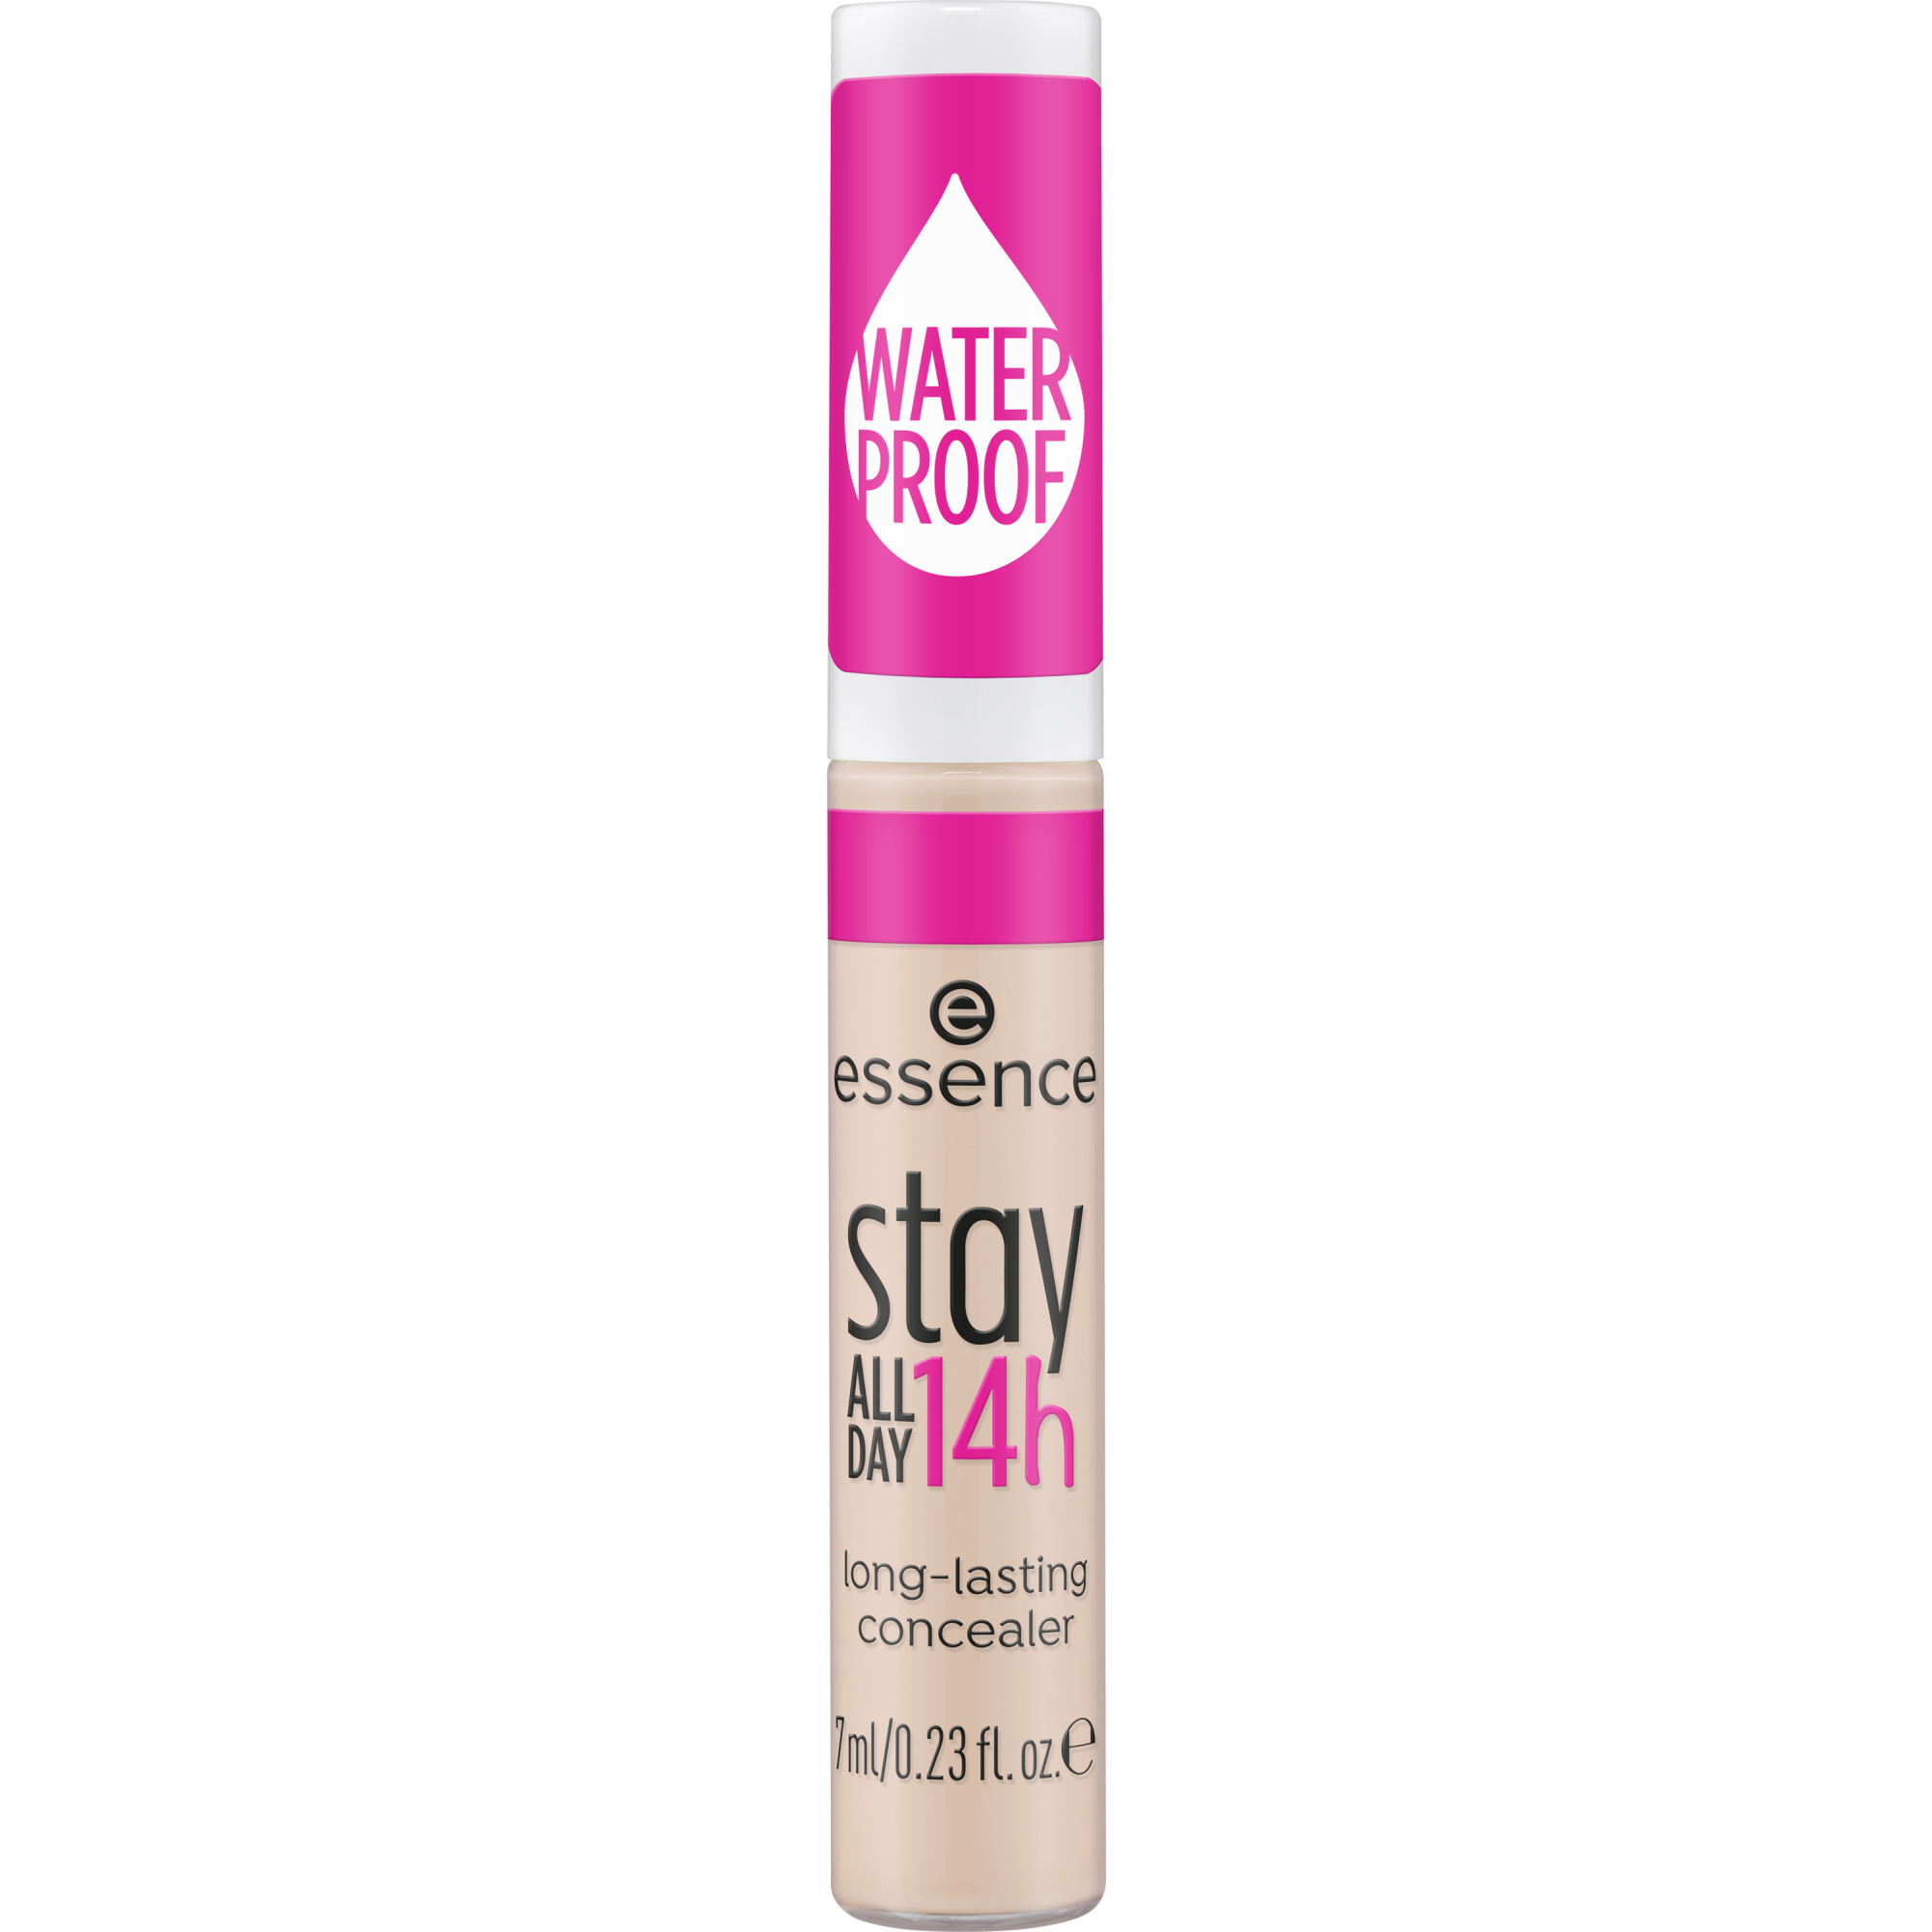 stay ALL DAY 14h long-lasting concealer